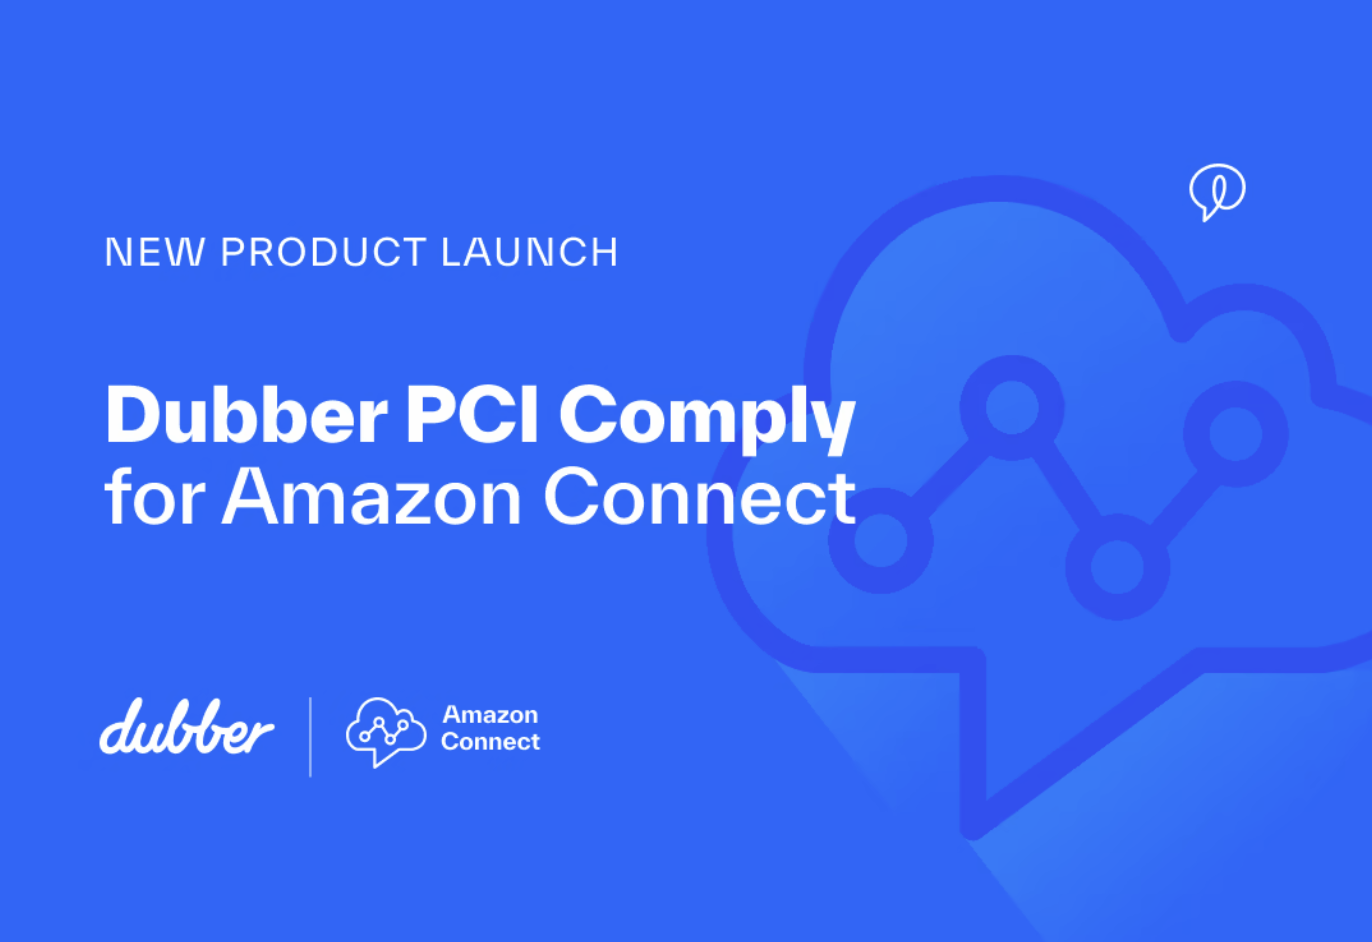 Introducing Dubber PCI Comply for Amazon Connect